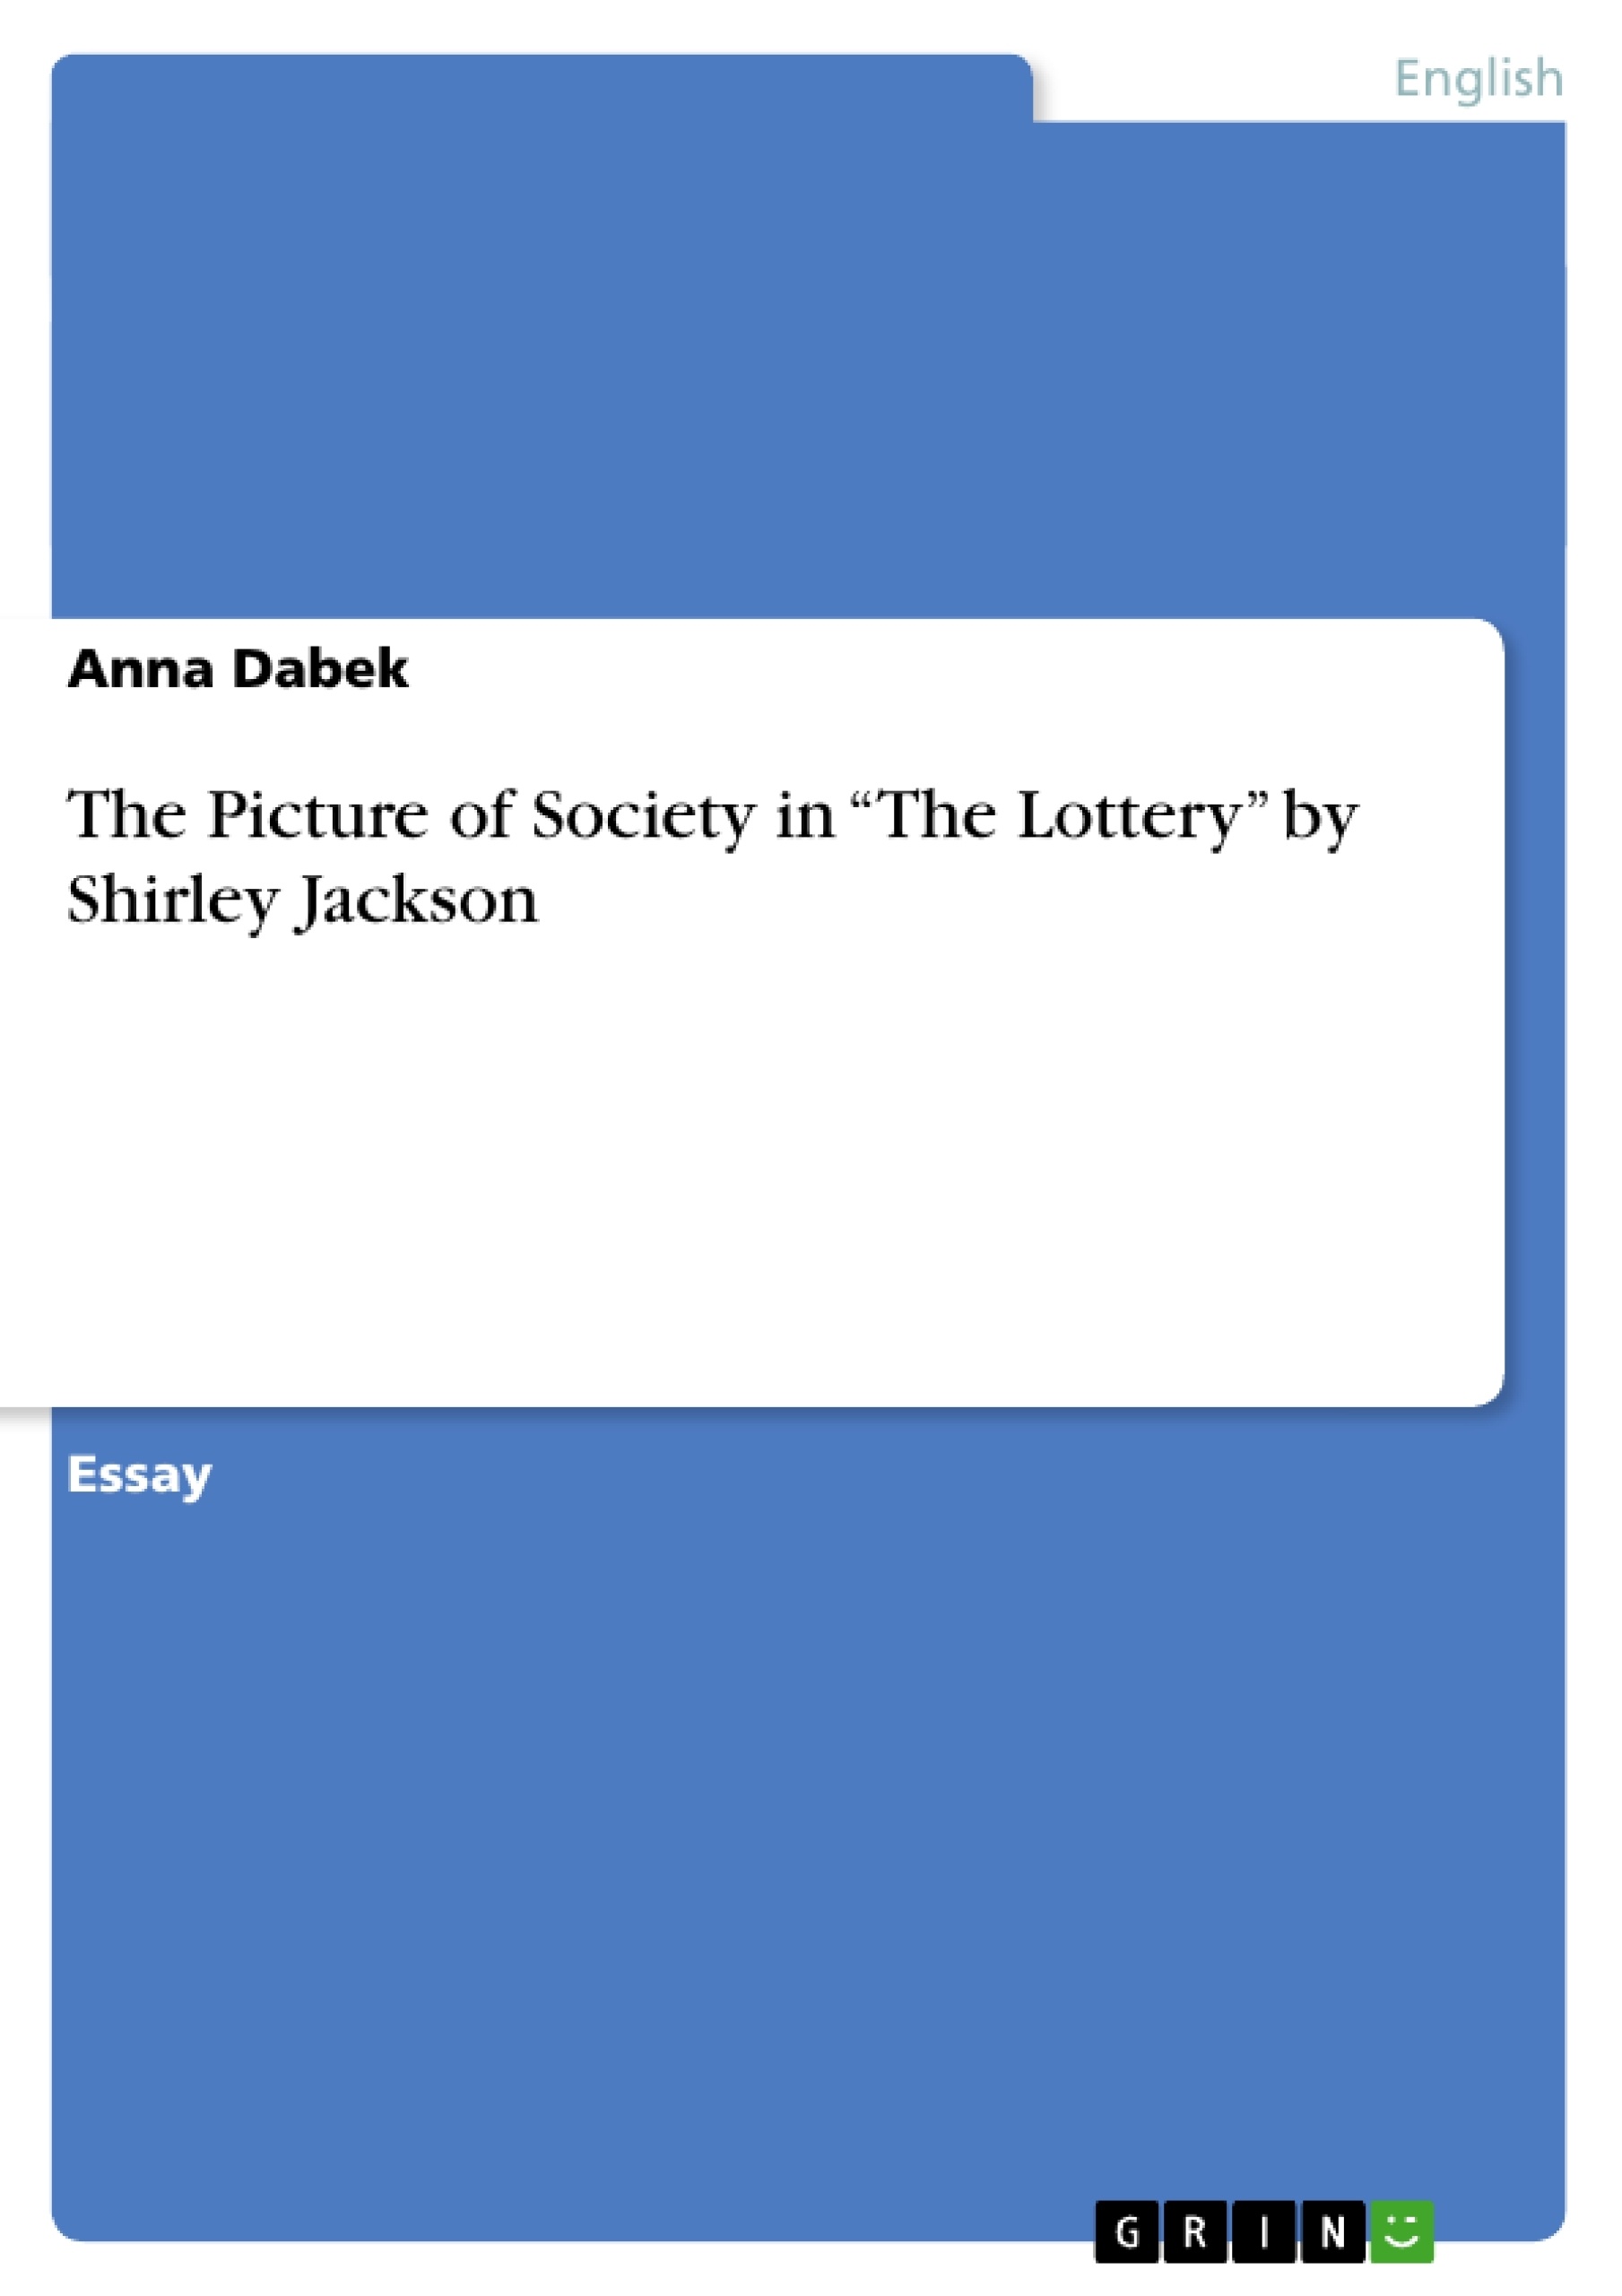 conclusion the lottery essay